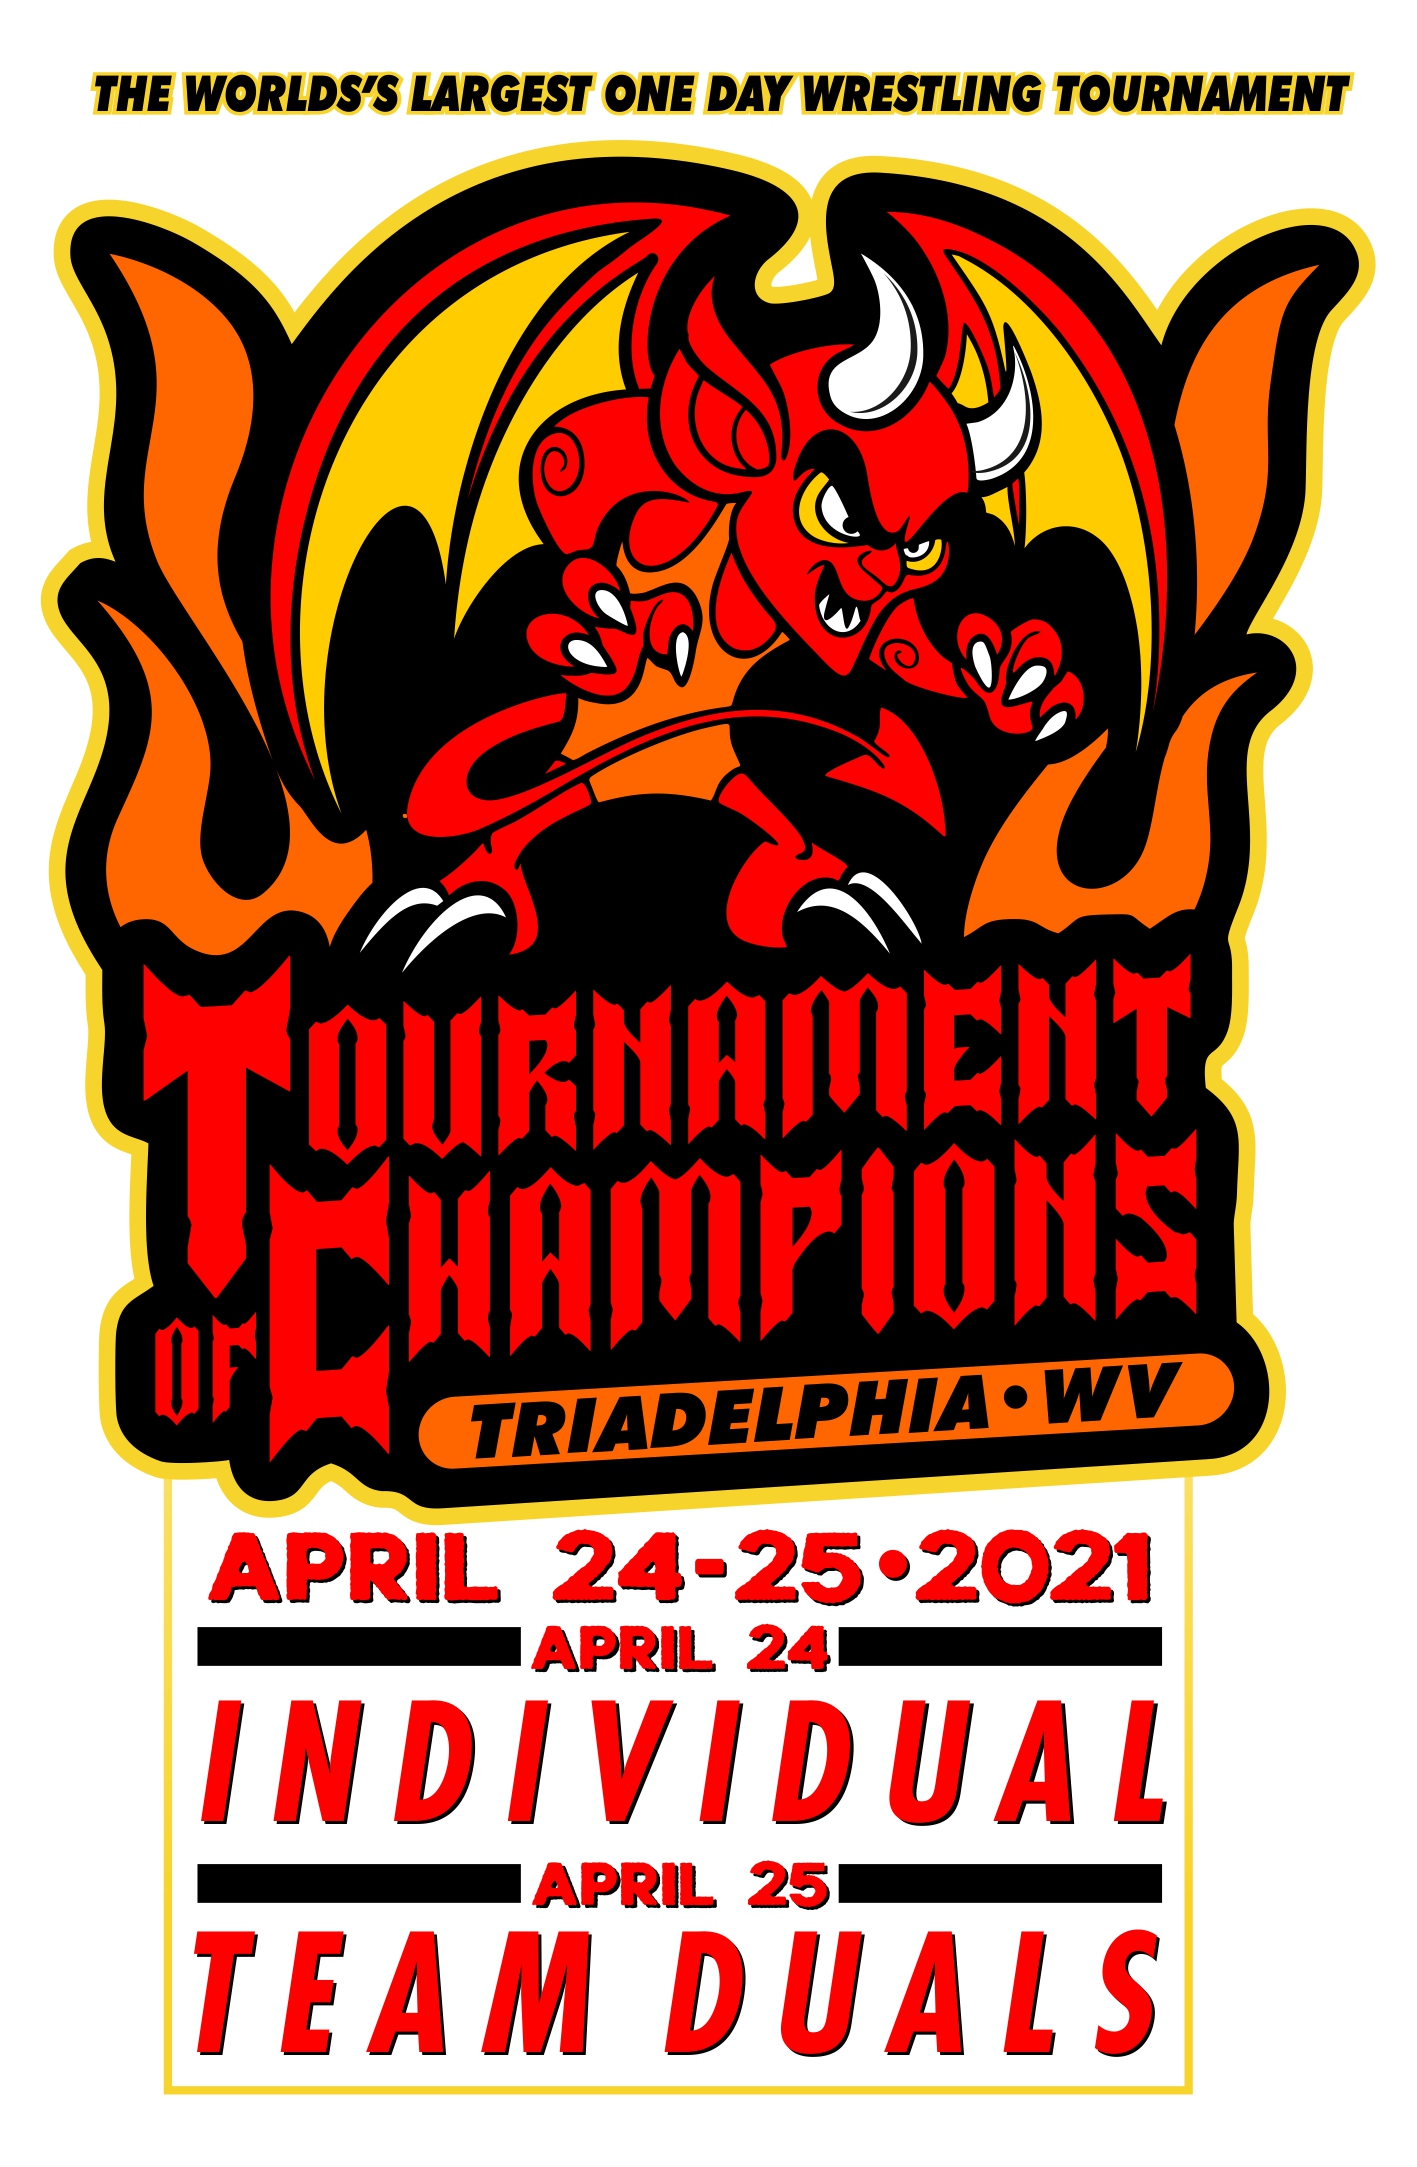 The world's largest one day wrestling tournament Tournament or Champions Triadelphia WV from April 24-25 2021 April 24 Individual April 15 Team Duals